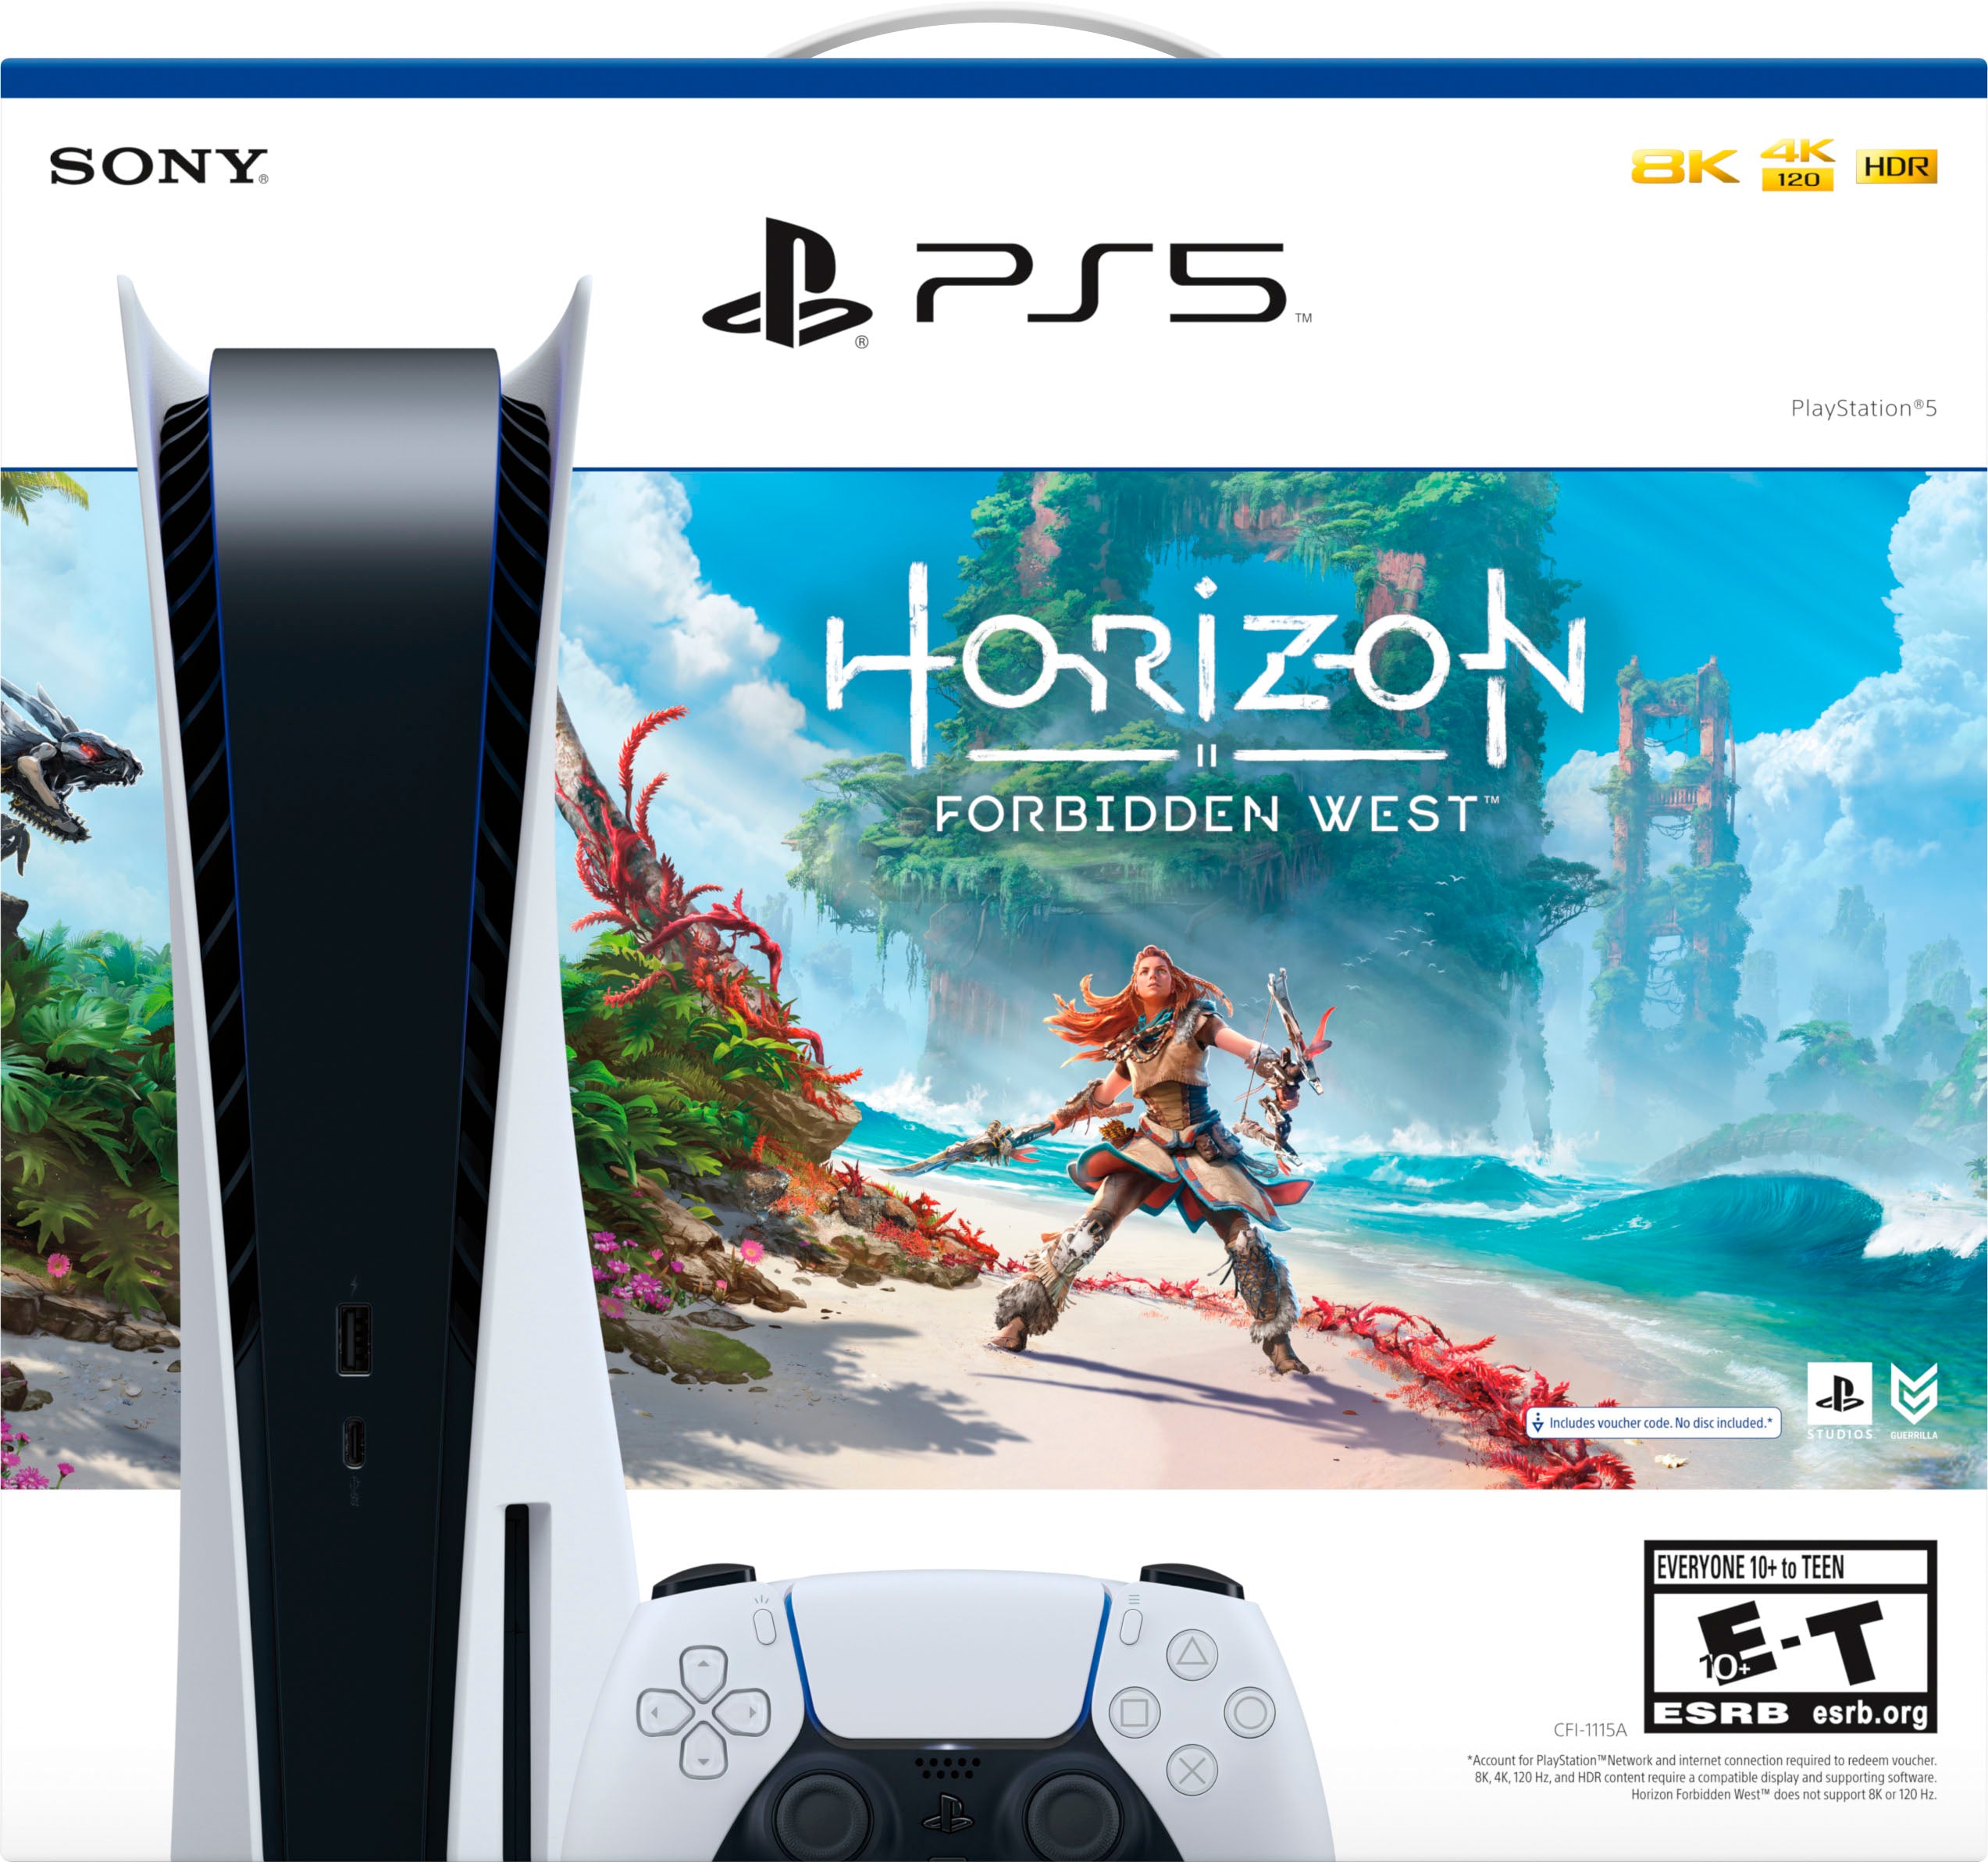 Playstation 5 Horizon Forbidden West Bundle with AC Valhalla and Mytrix Controller Charger